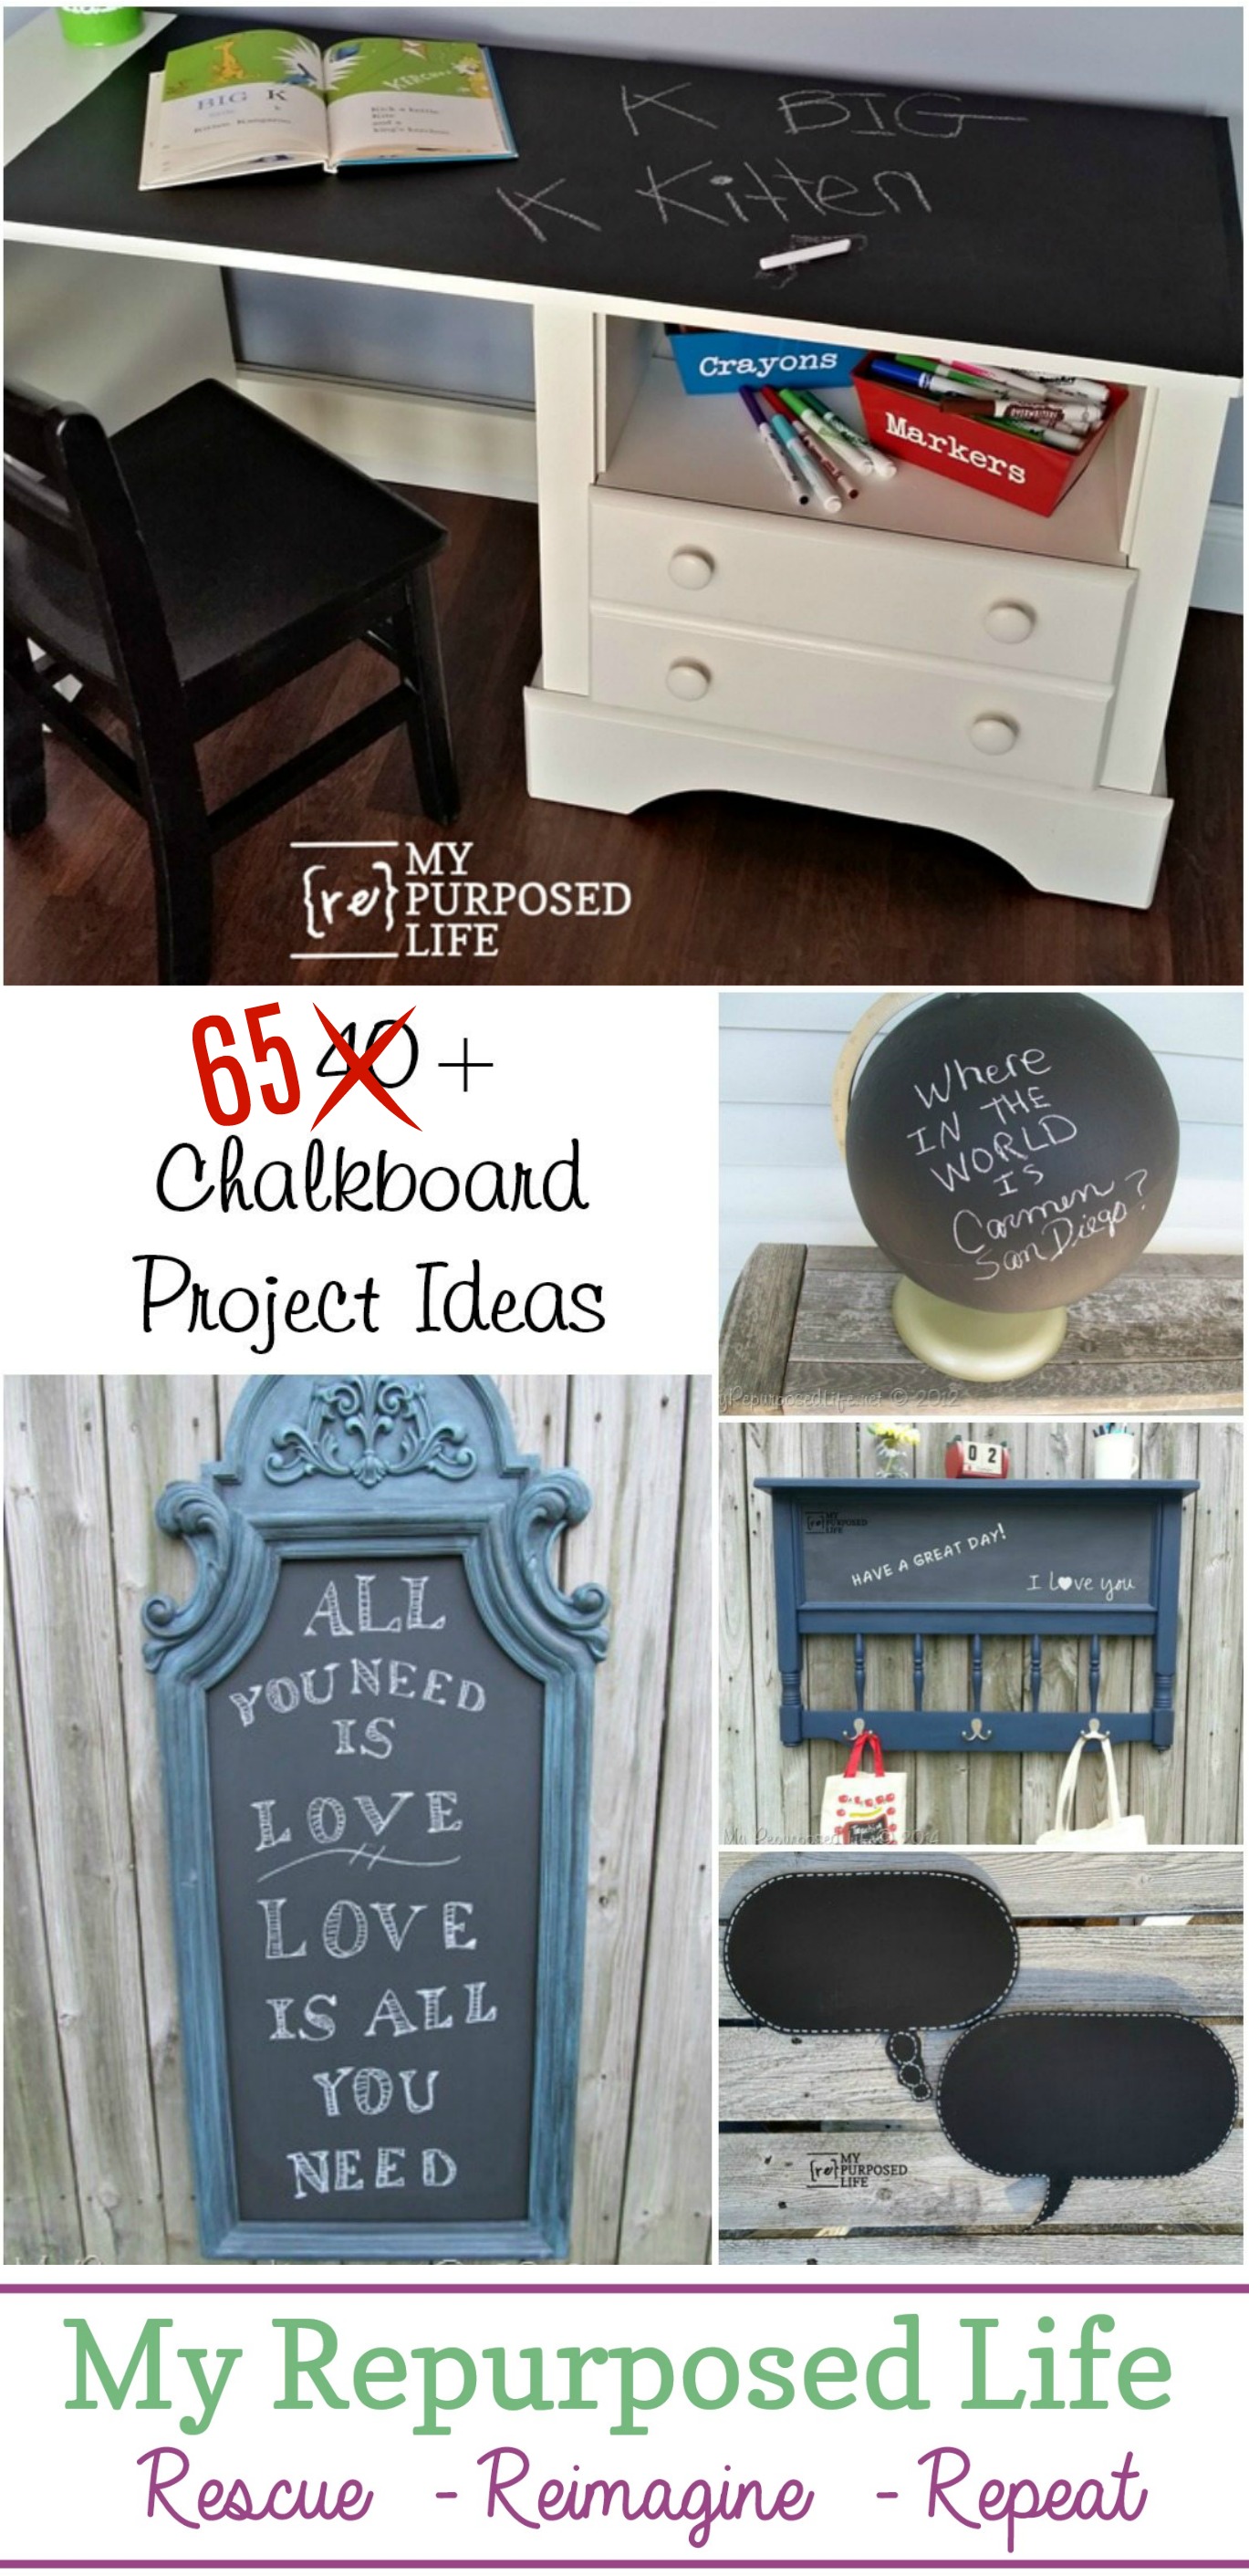 Chalkboard Paint Ideas and Projects